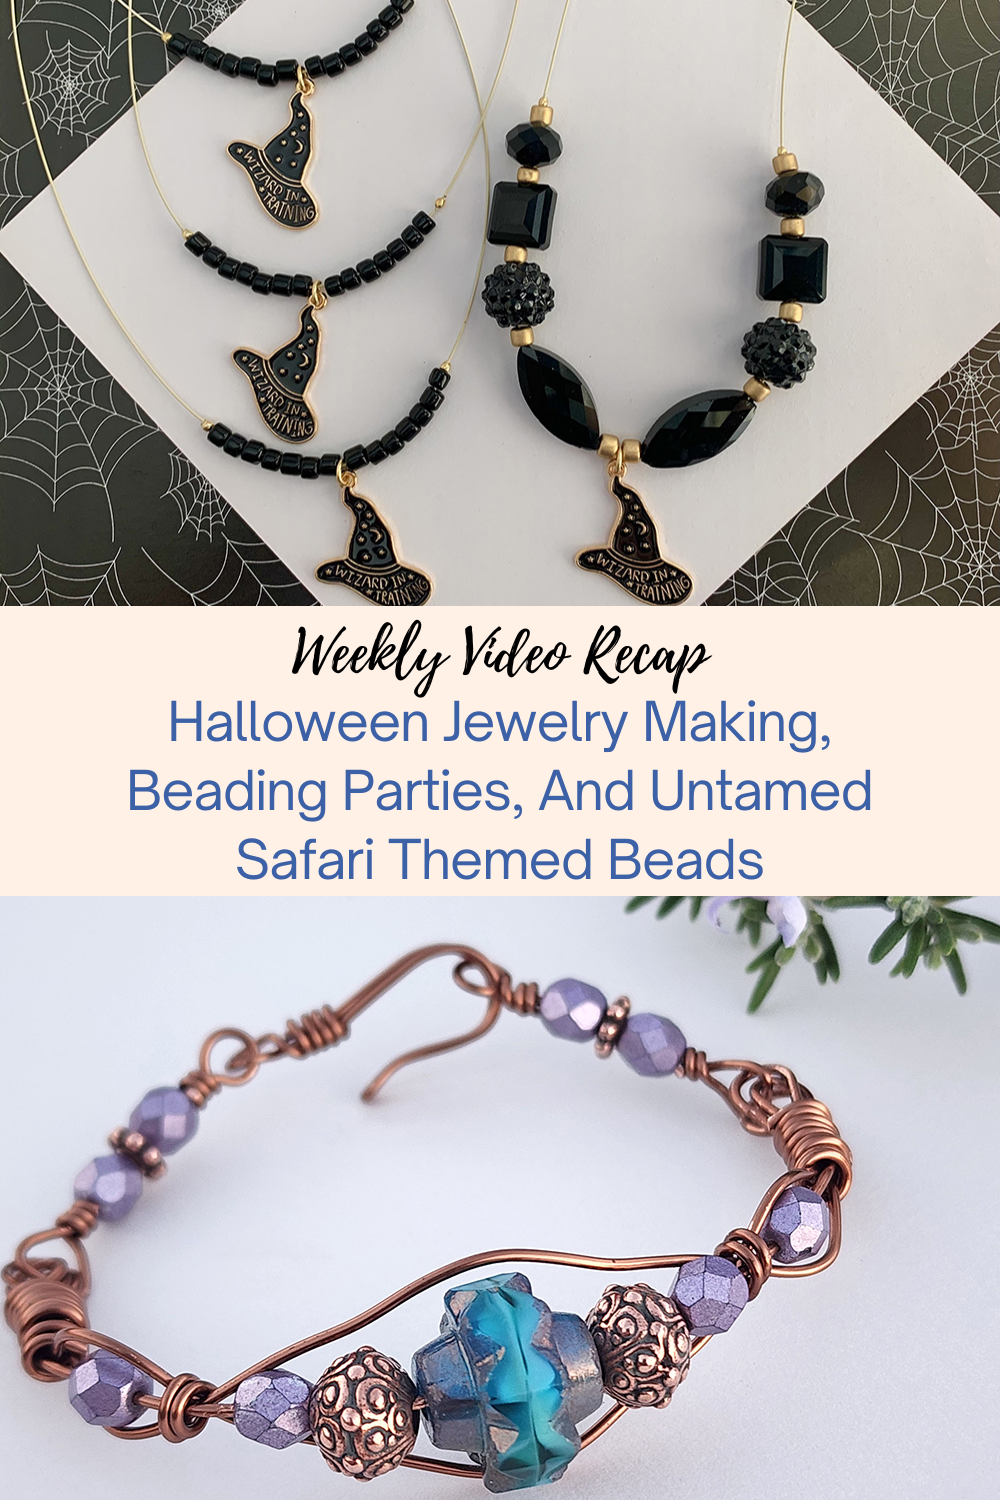 Halloween Jewelry Making, Beading Parties, And Untamed Safari Themed Beads Collage